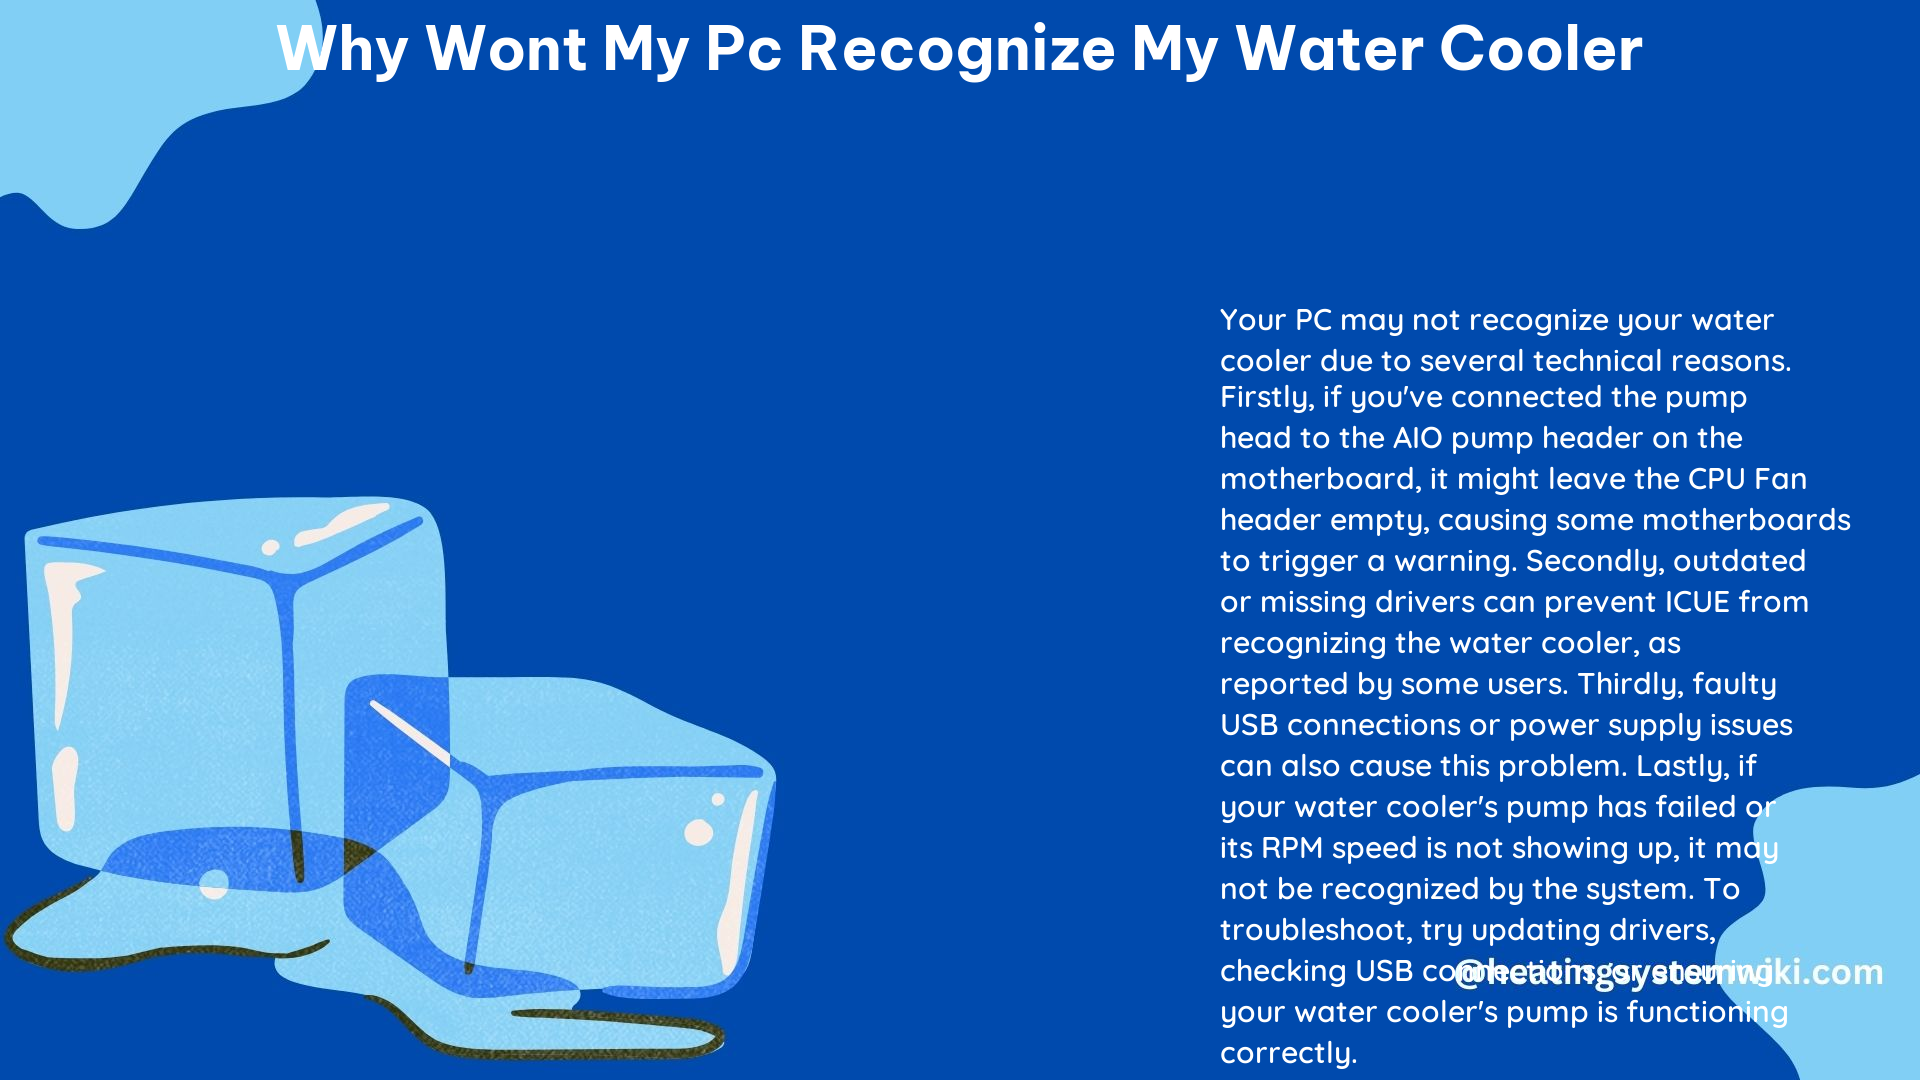 Why Wont My PC Recognize My Water Cooler